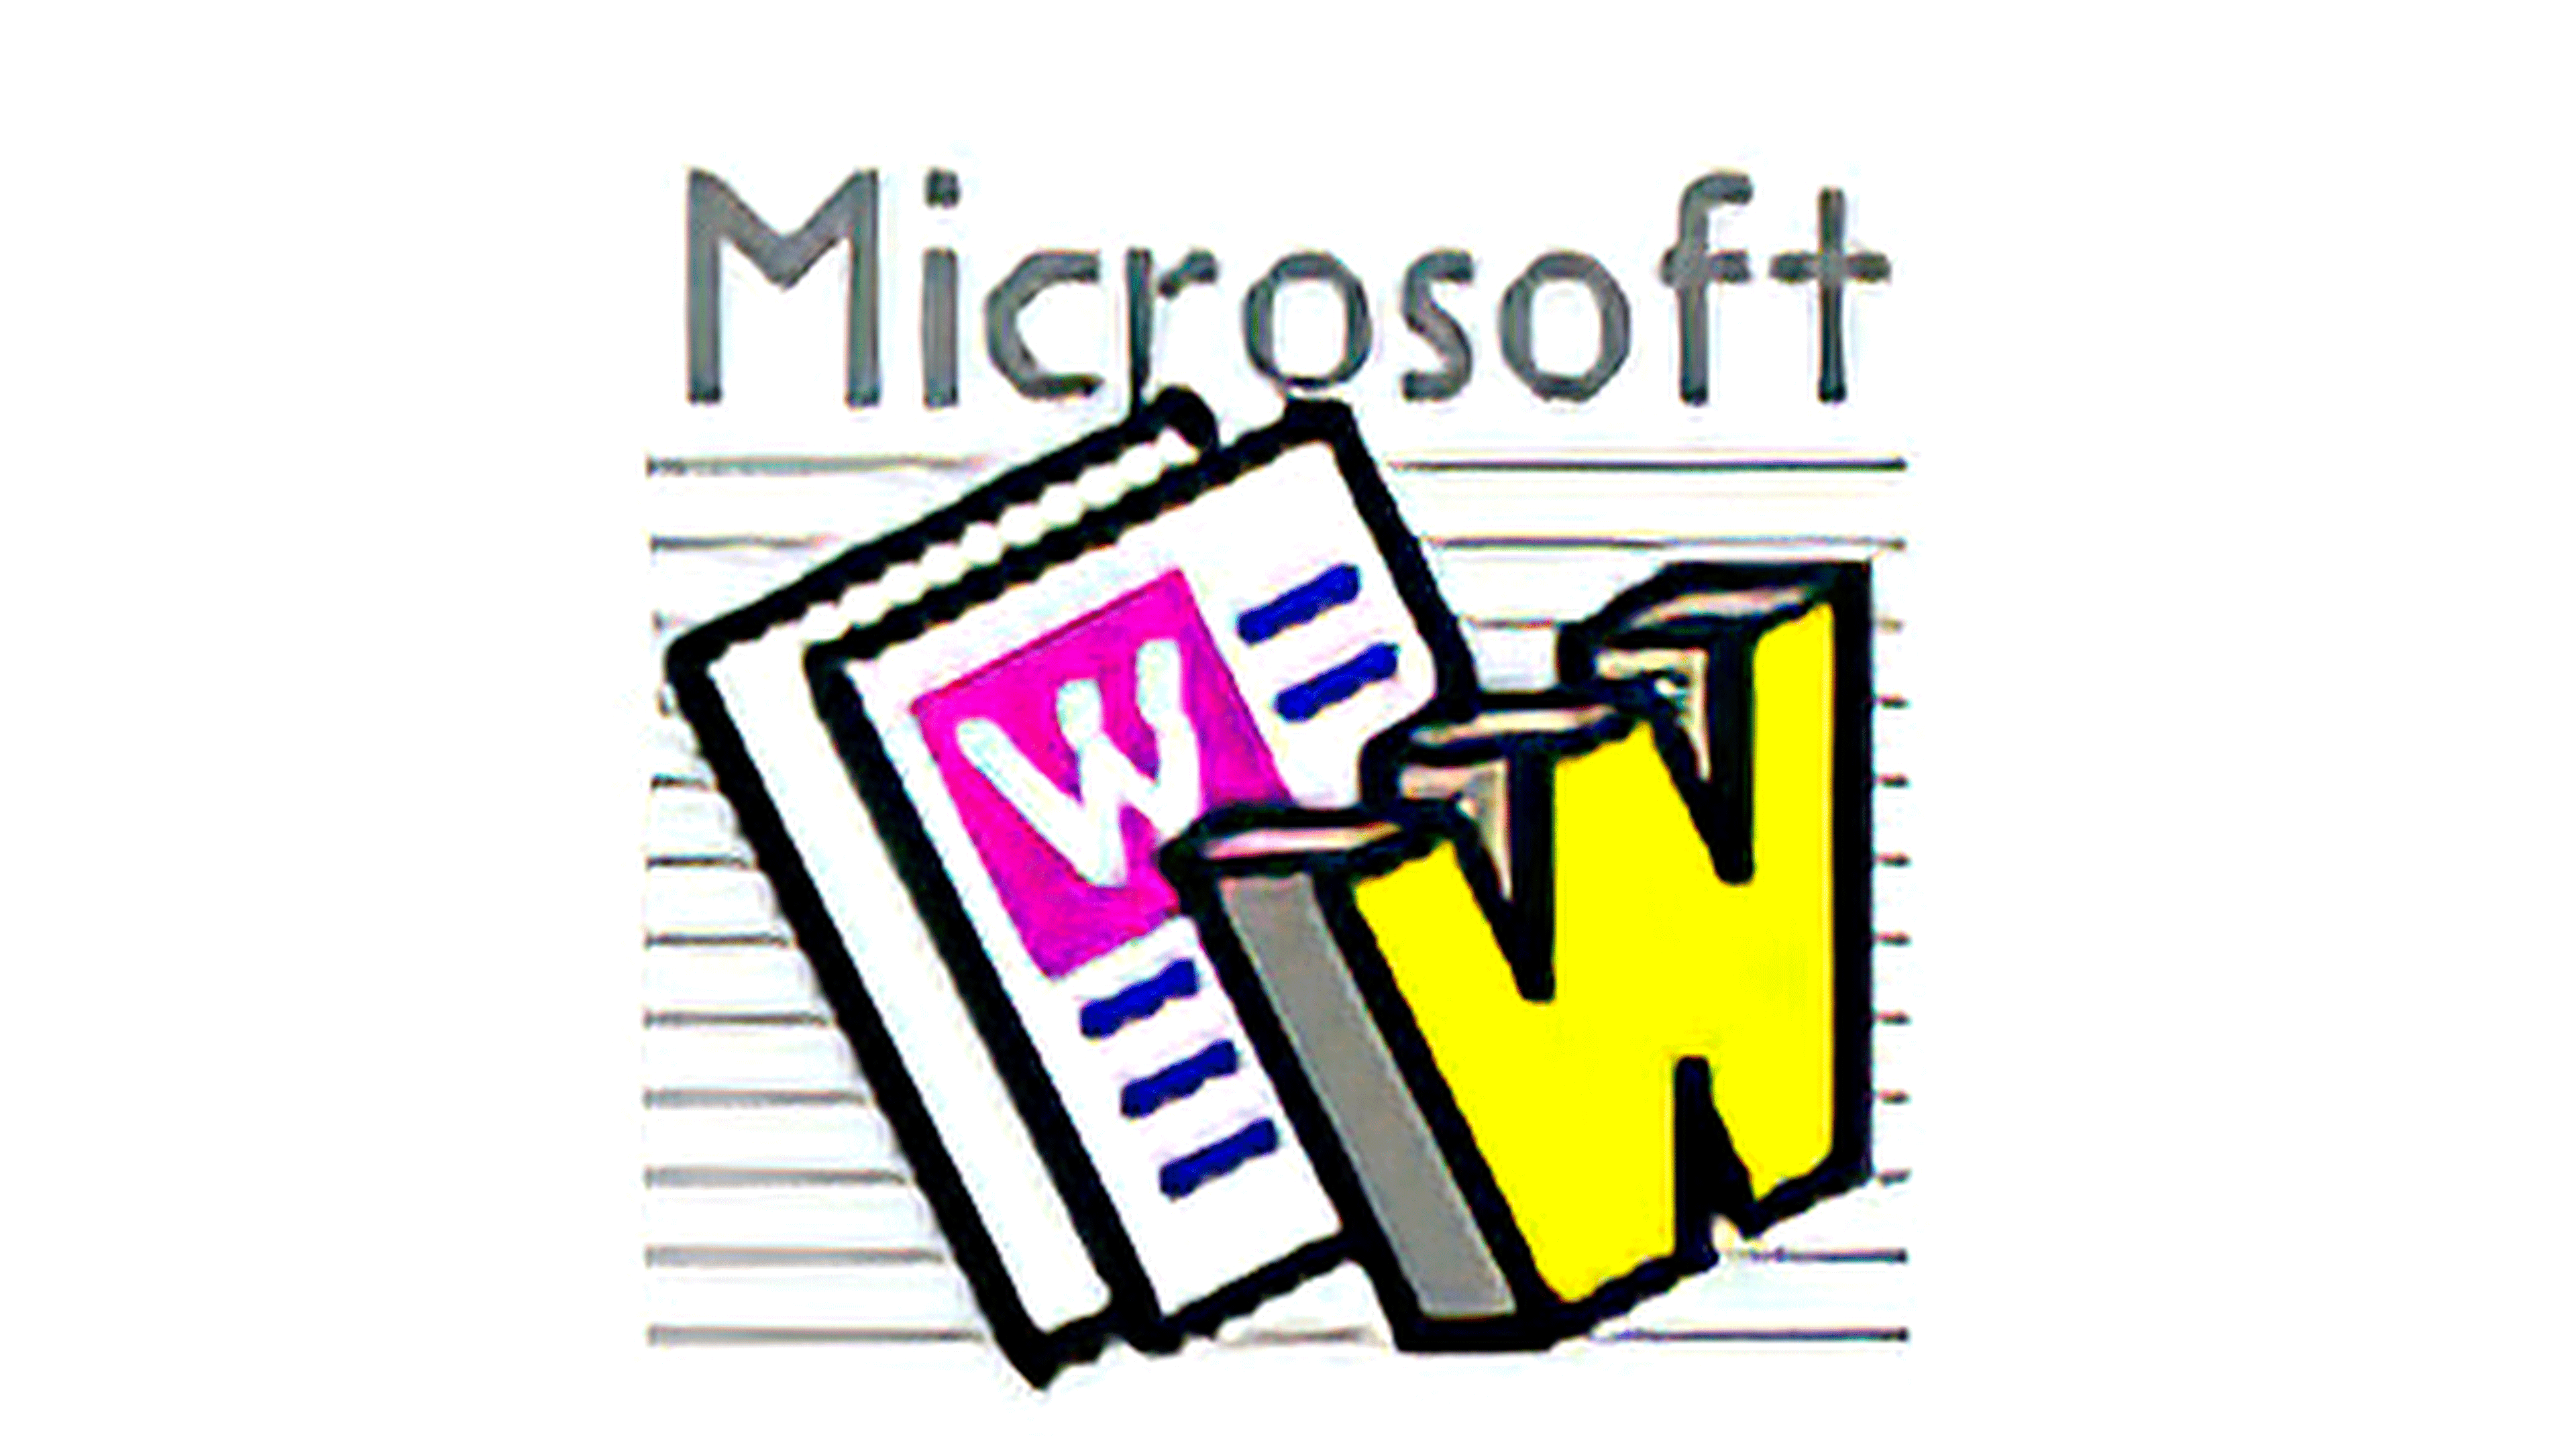 Microsoft Word Logo The Most Famous Brands And Company Logos In The World